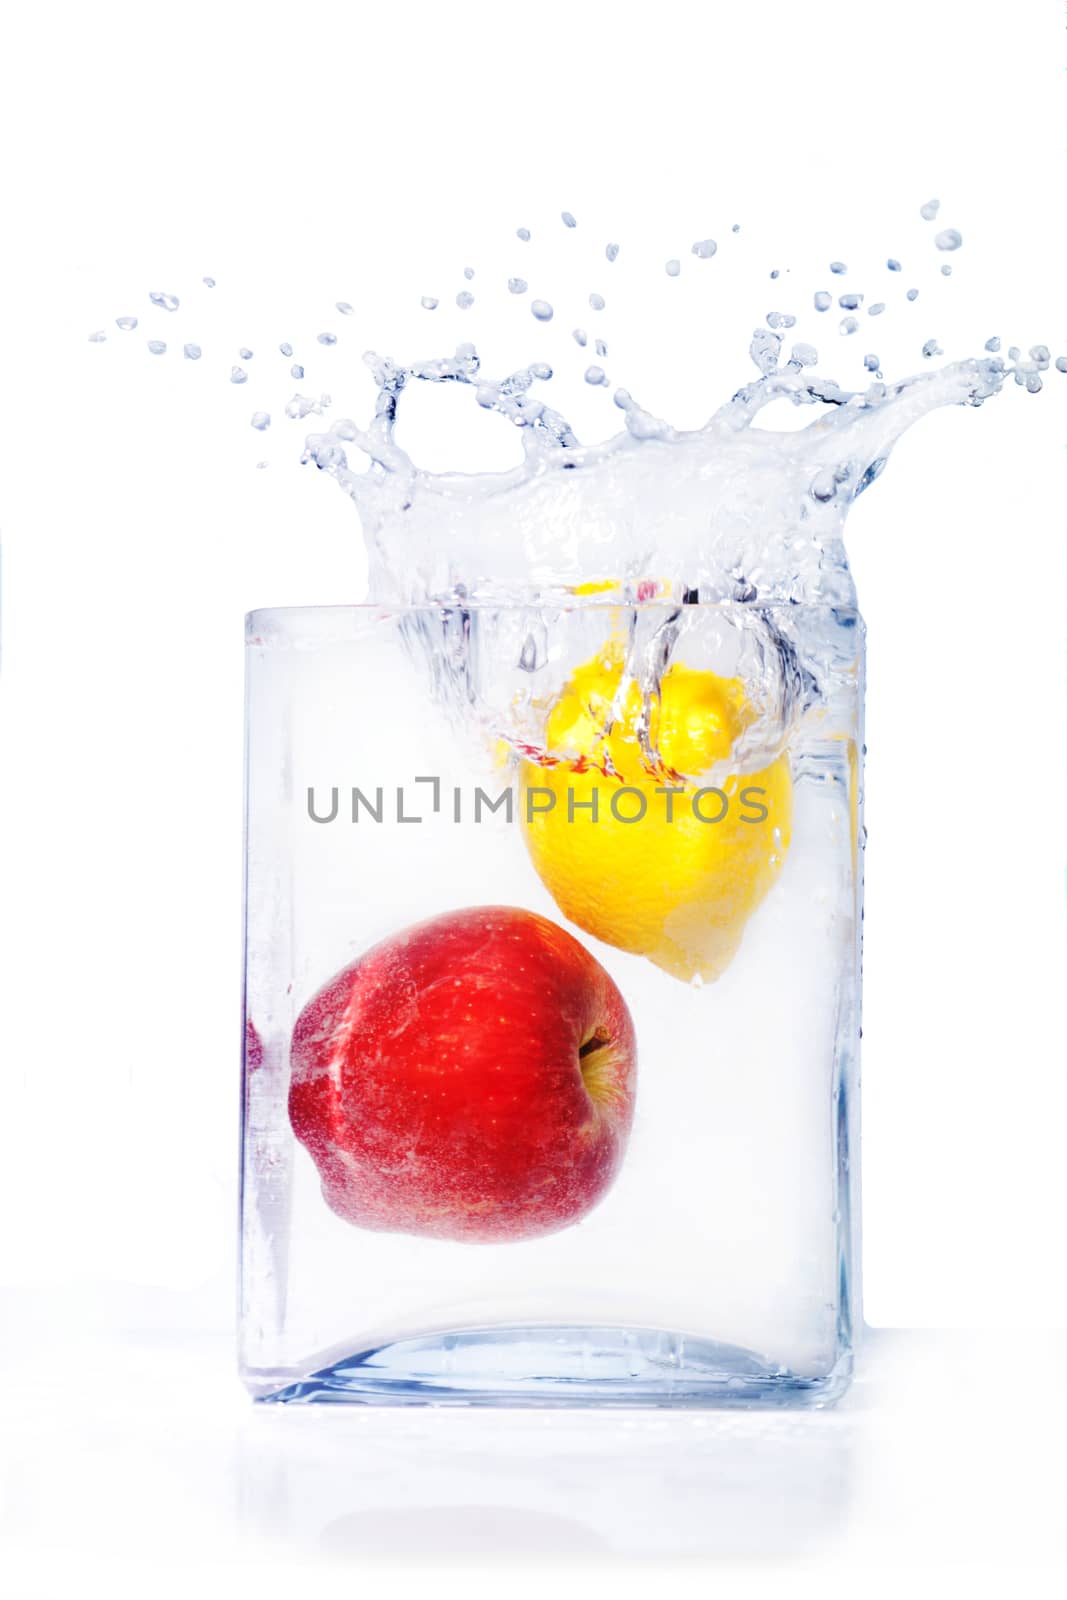  apple and lemon in water and splashes is isolated